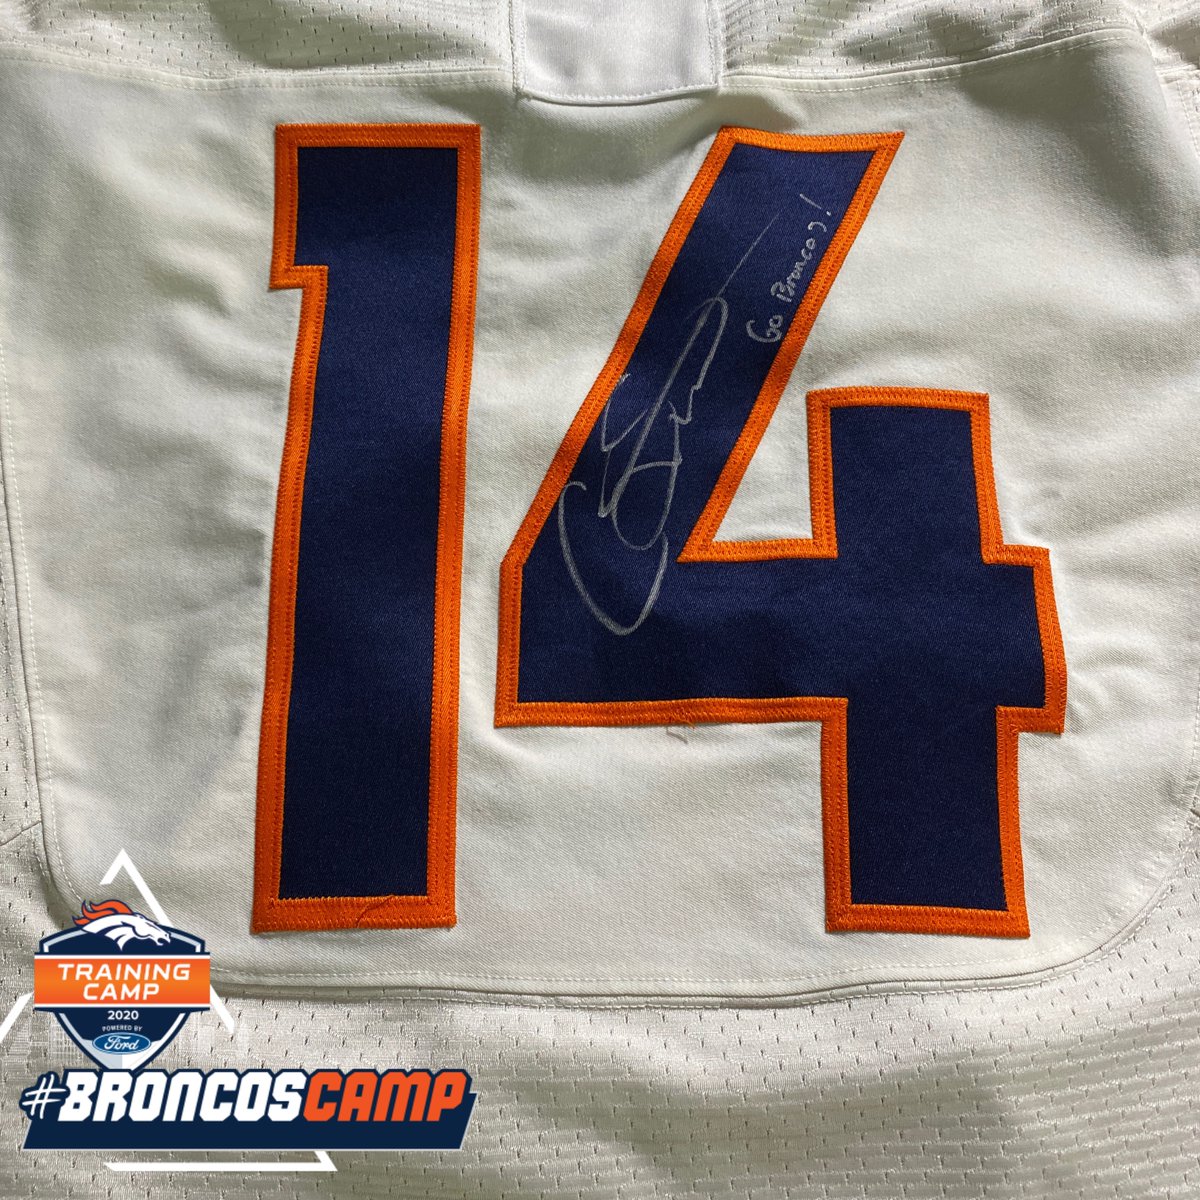 RT & follow for a chance to win a signed practice-worn jersey from @SuttonCourtland courtesy of @Ford. Also, text “Ford” to 39979 to receive $500 off your next Ford vehicle purchase!